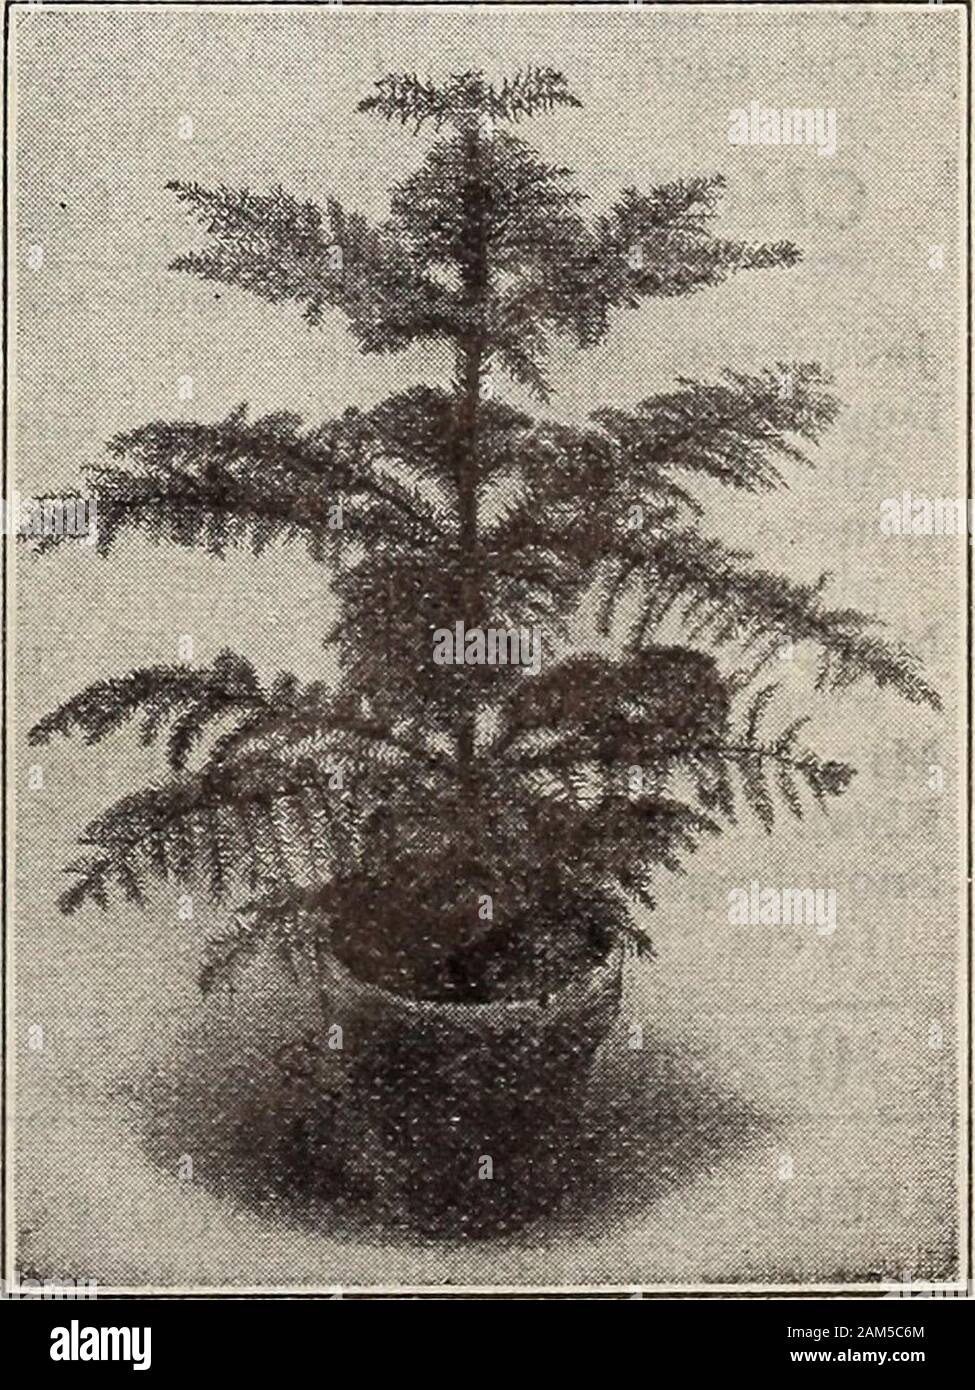 New floral guide : autumn 1913 . s ;; ;; :;::::::::::4£ :; *:. 60 Baby Christmas Tree (Araucaria excelsa) 23 THE CONARD 8s JONES CO., WEST GROVE, PA. Stock Photo